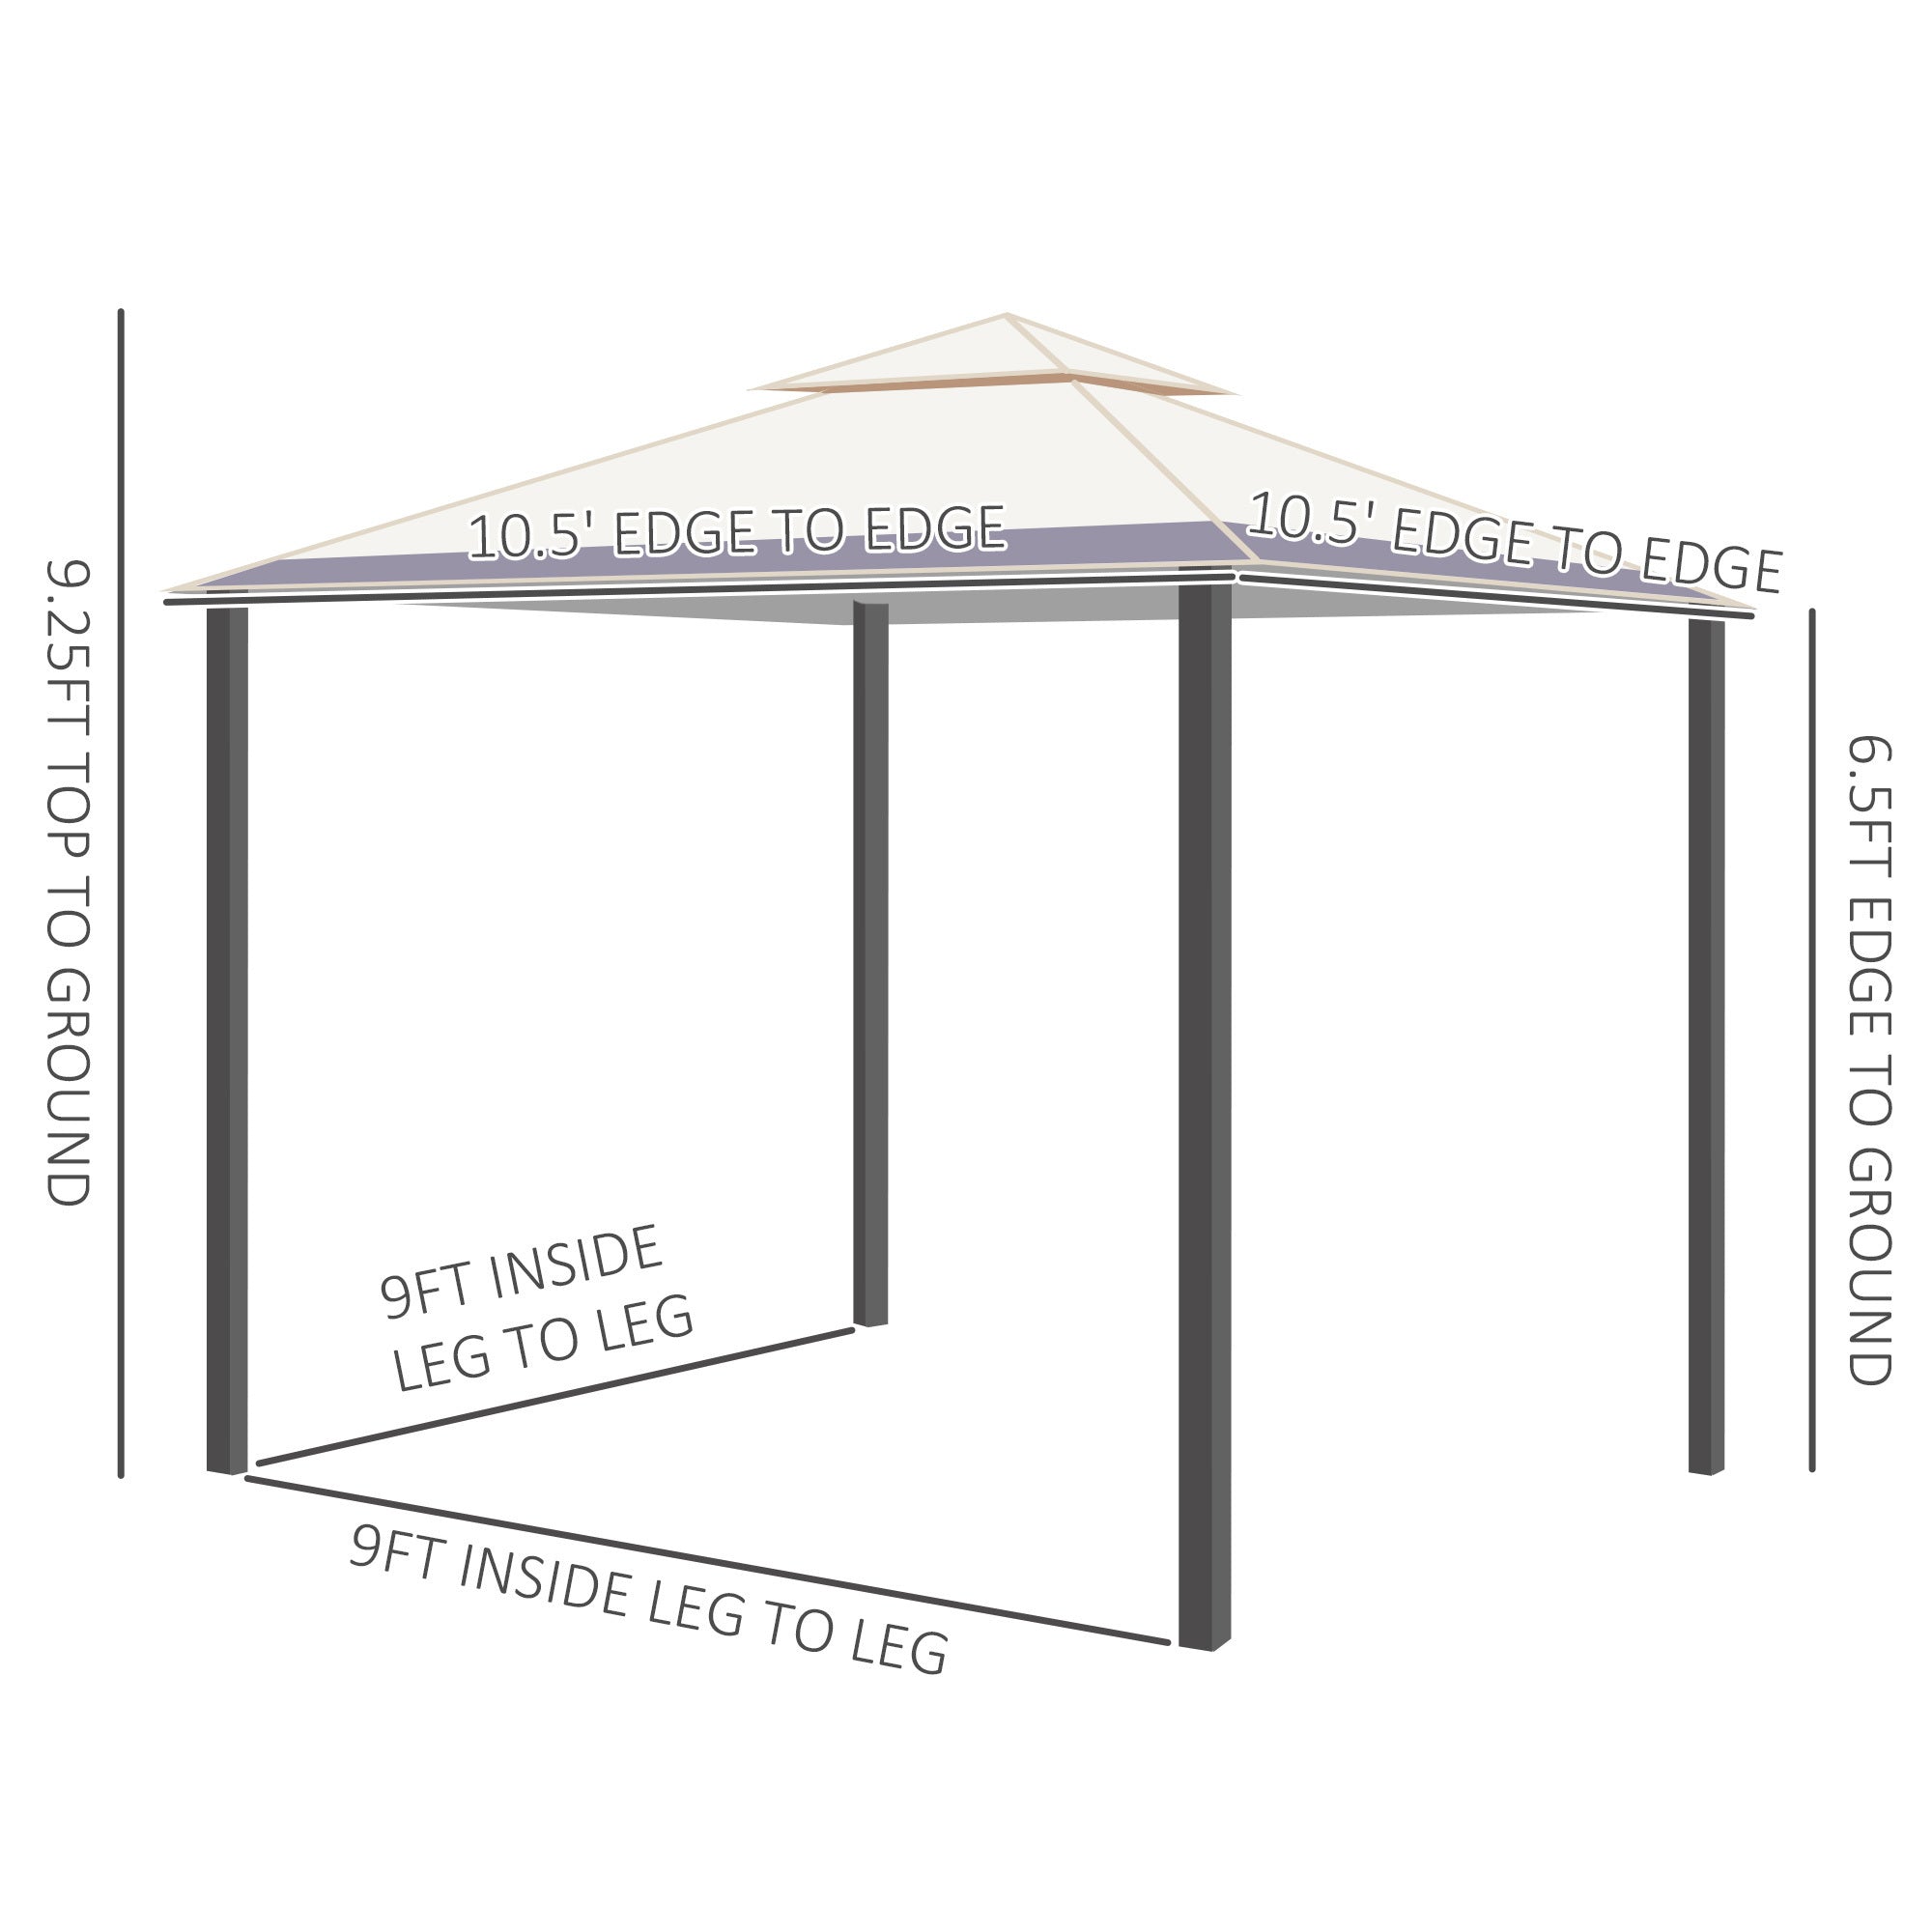 10'x10' Outdoor Gazebo with Netting and Curtains, Patio Gazebo Canopy with 2-Tier Soft Top Roof and Steel Frame for Lawn, Garden, Backyard and Deck - White